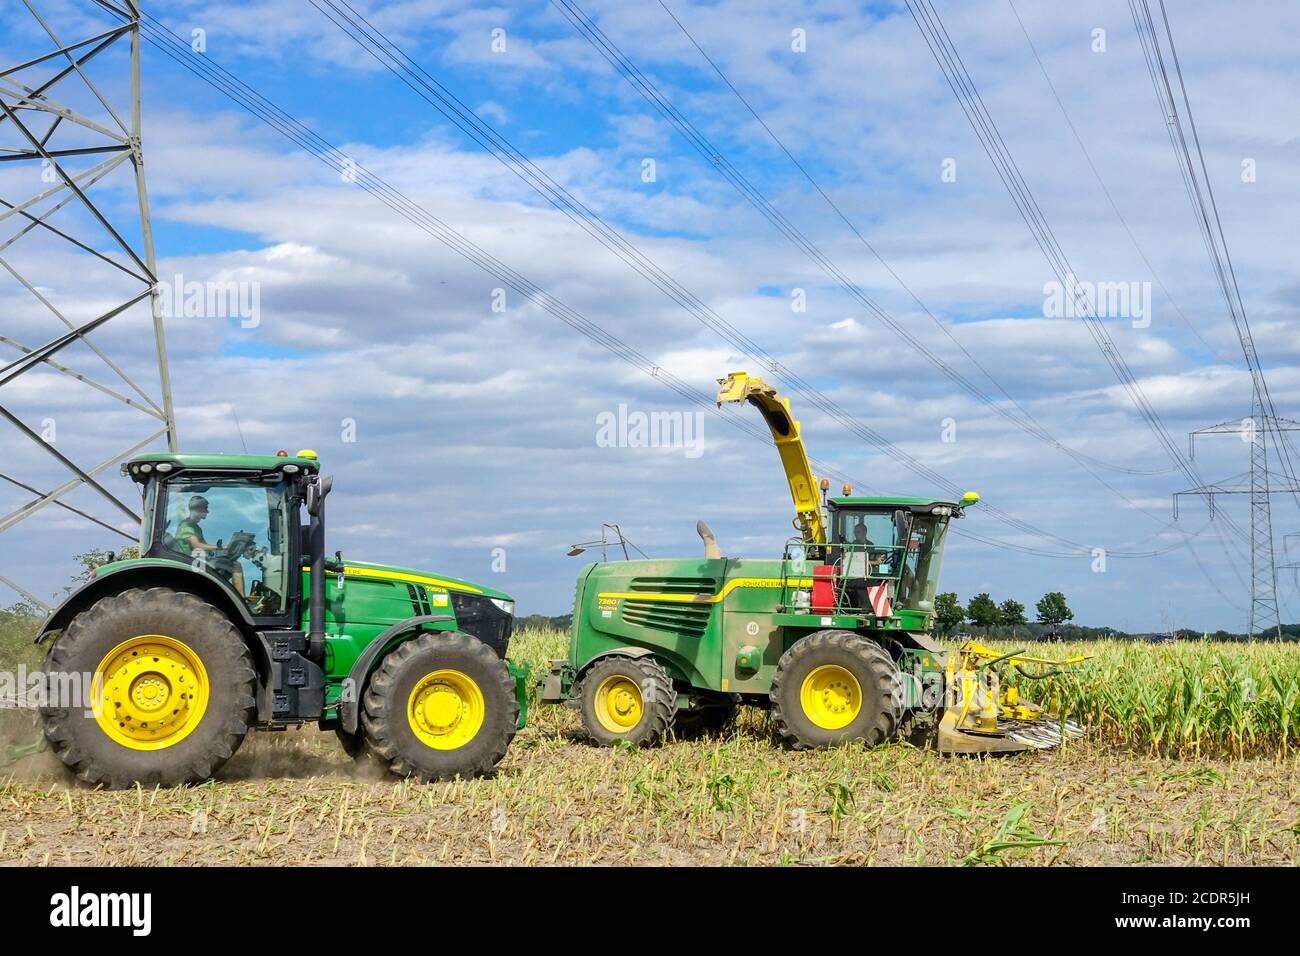 Germany agriculture farming harvesting corn under high-voltage lines and pylons John Deere tractor Stock Photo